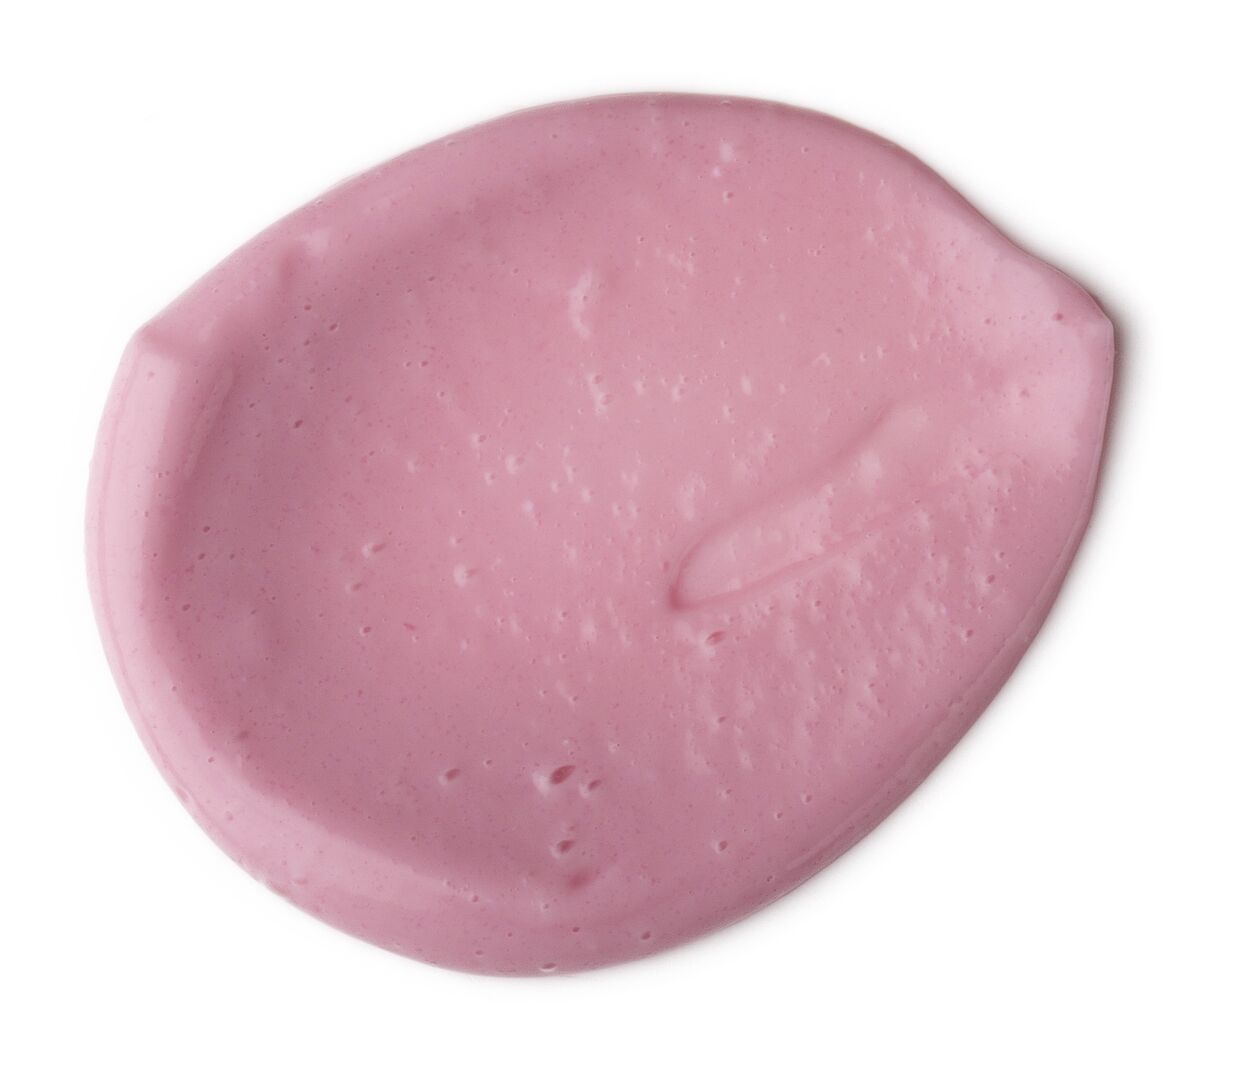 pink peppermint foot lotion naked commerce ayr web